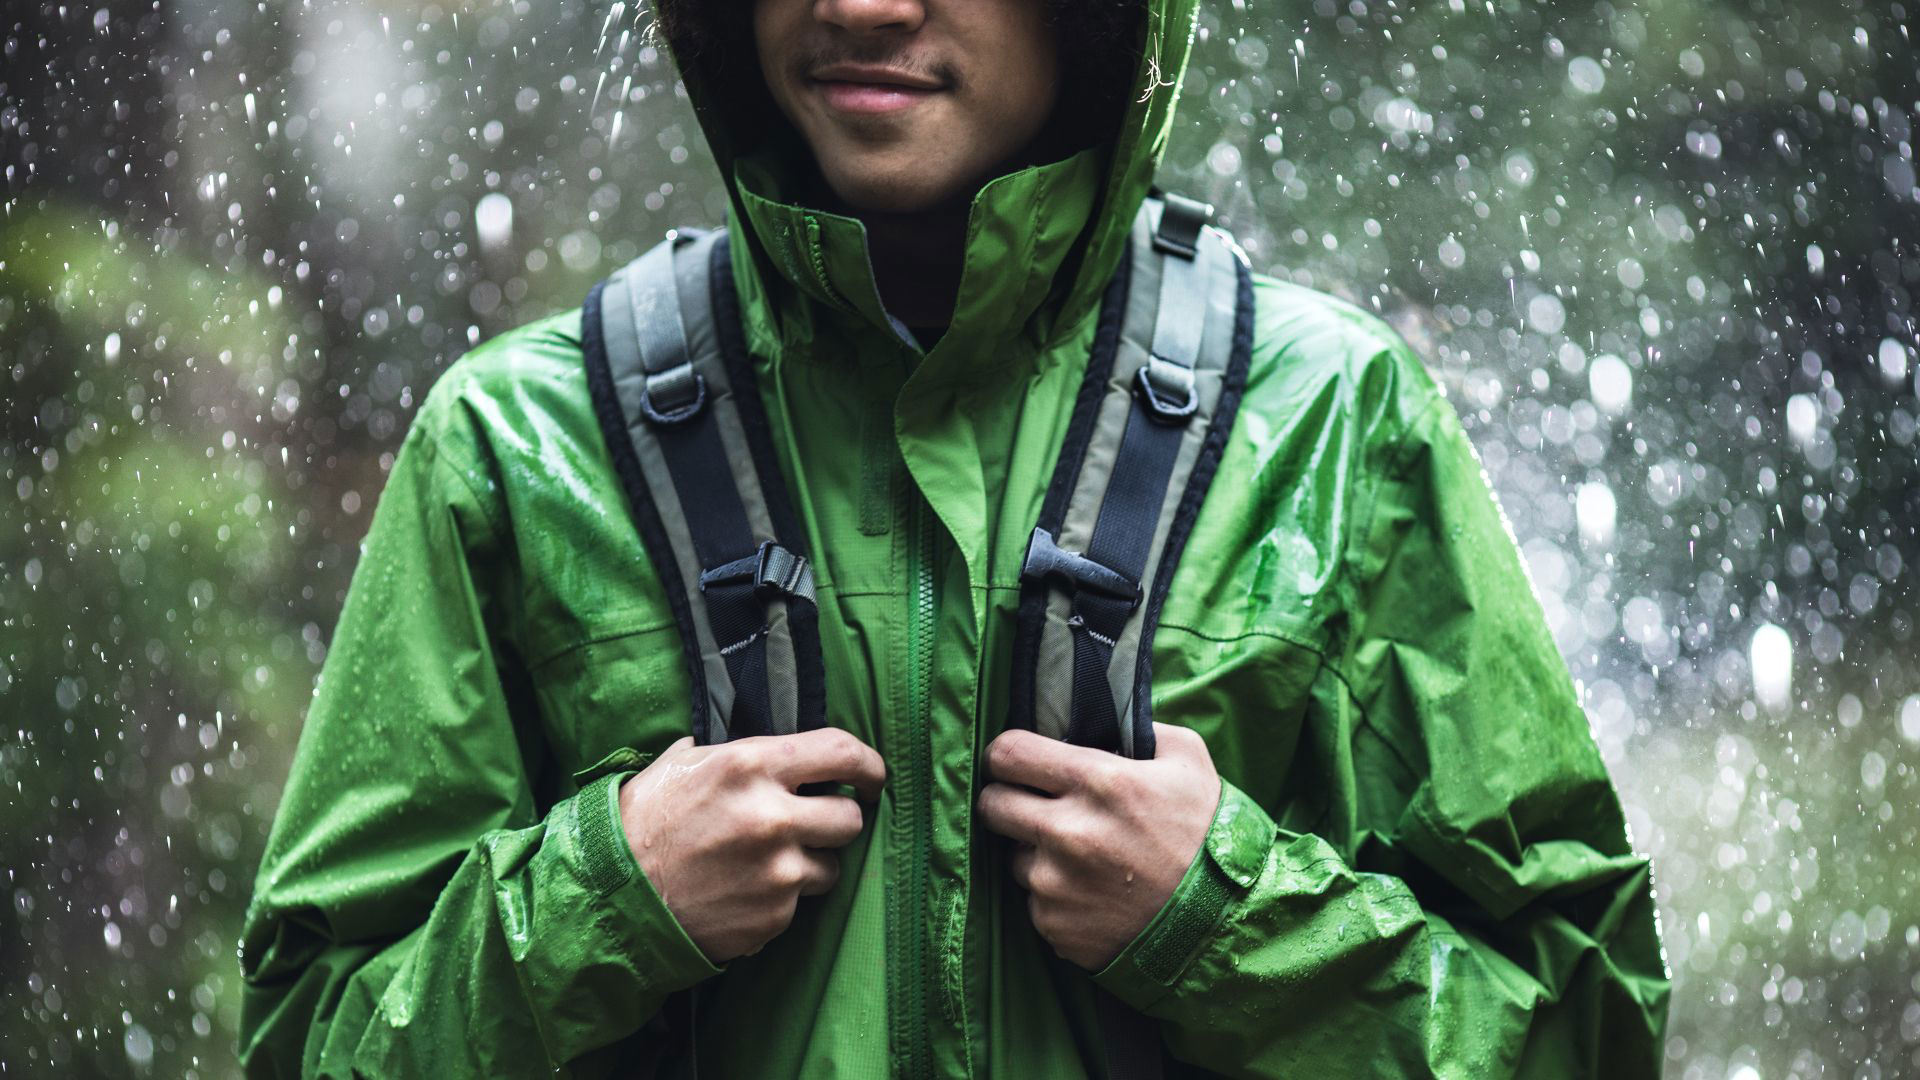 How to patch a waterproof jacket in 4 easy steps